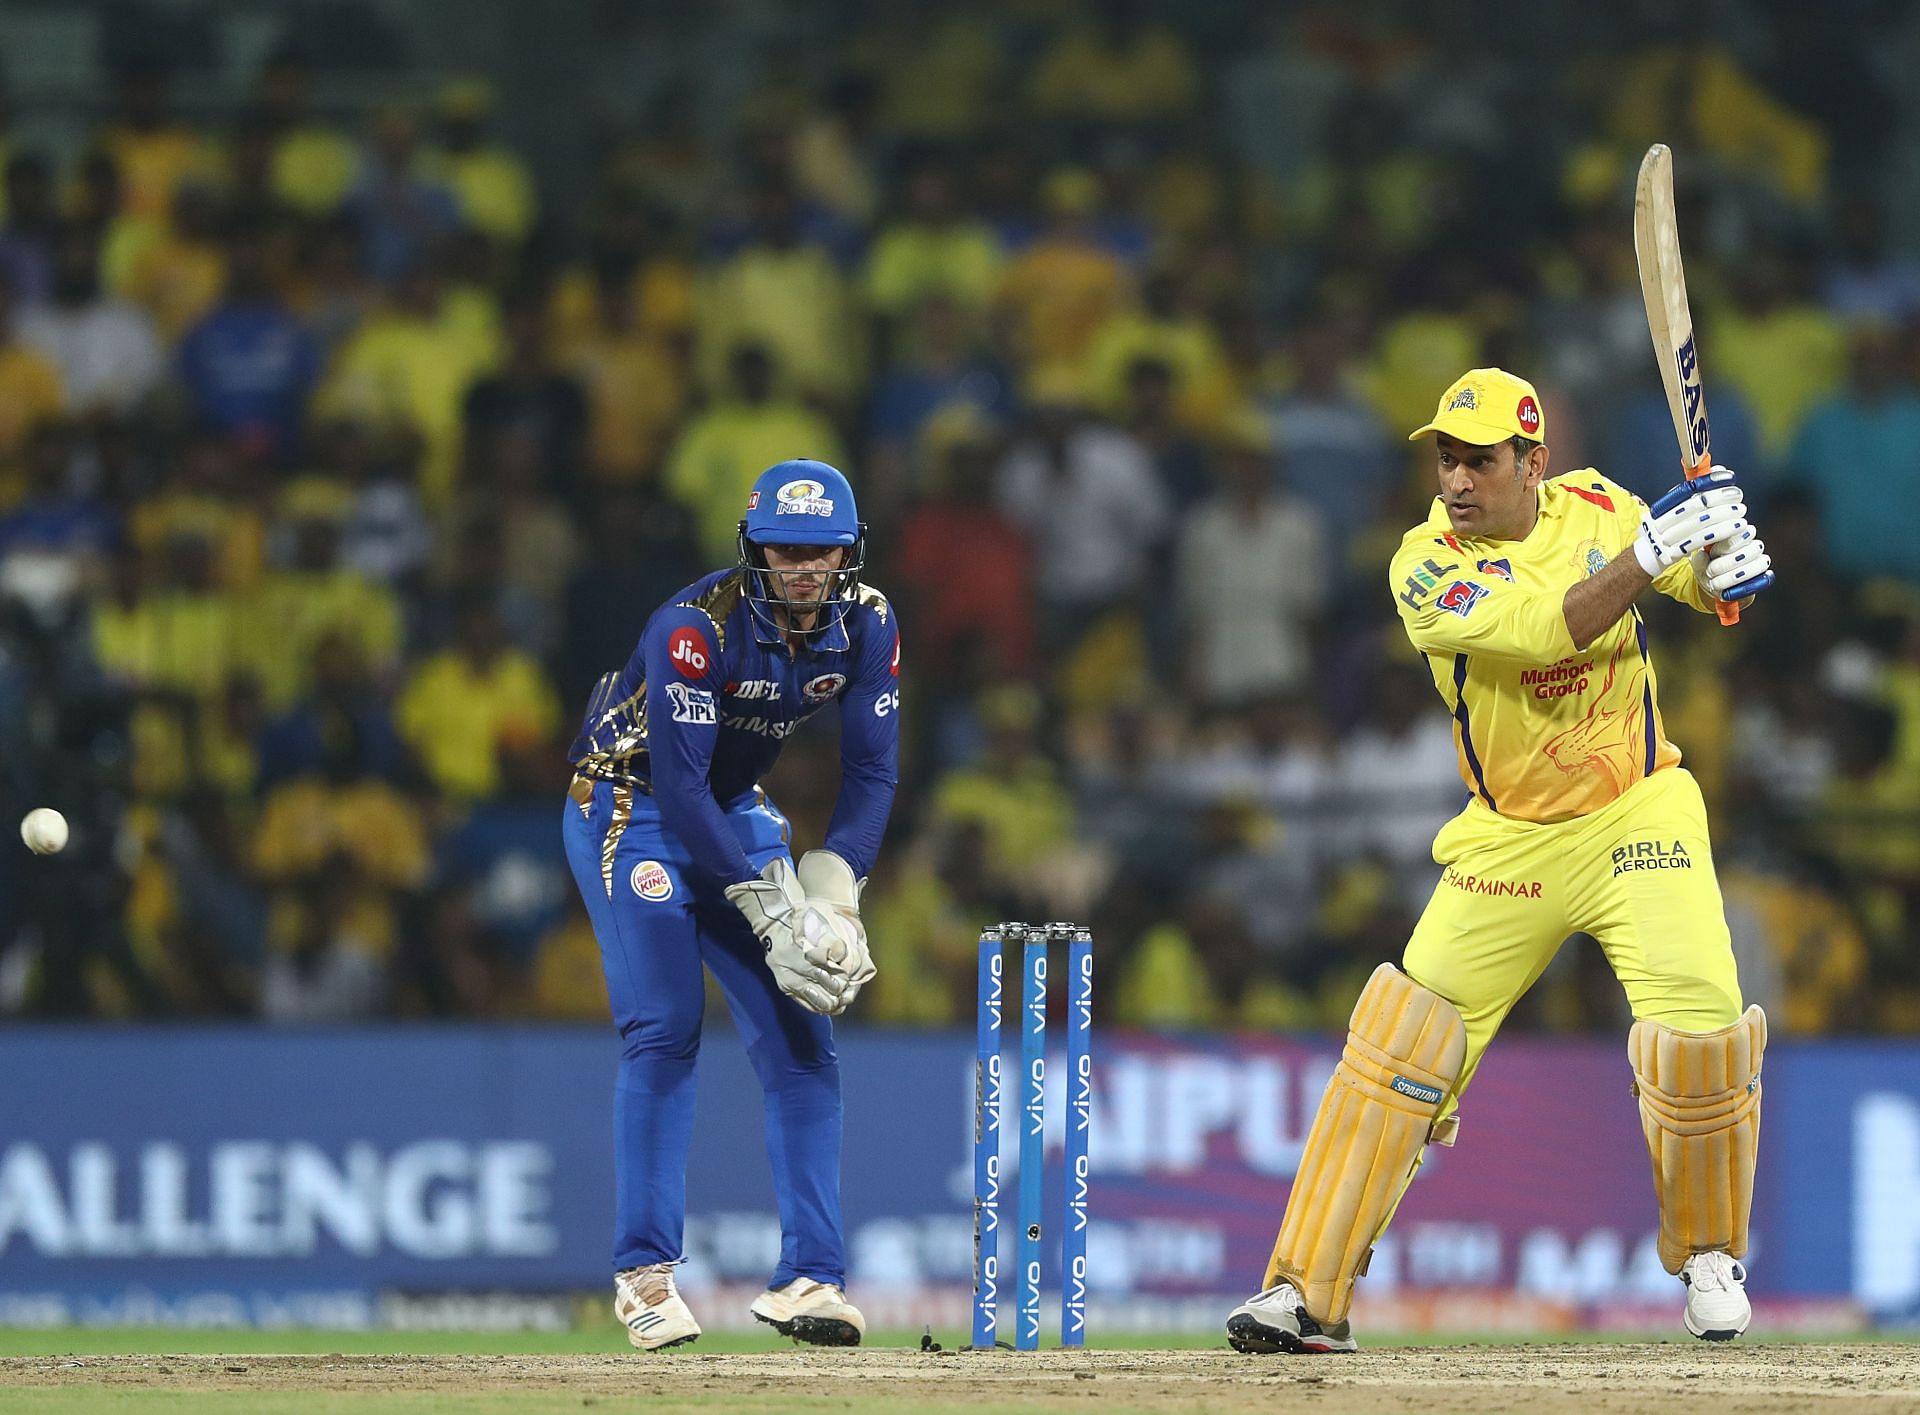 MSD batting against Mumbai Indians. Pic: Getty Images